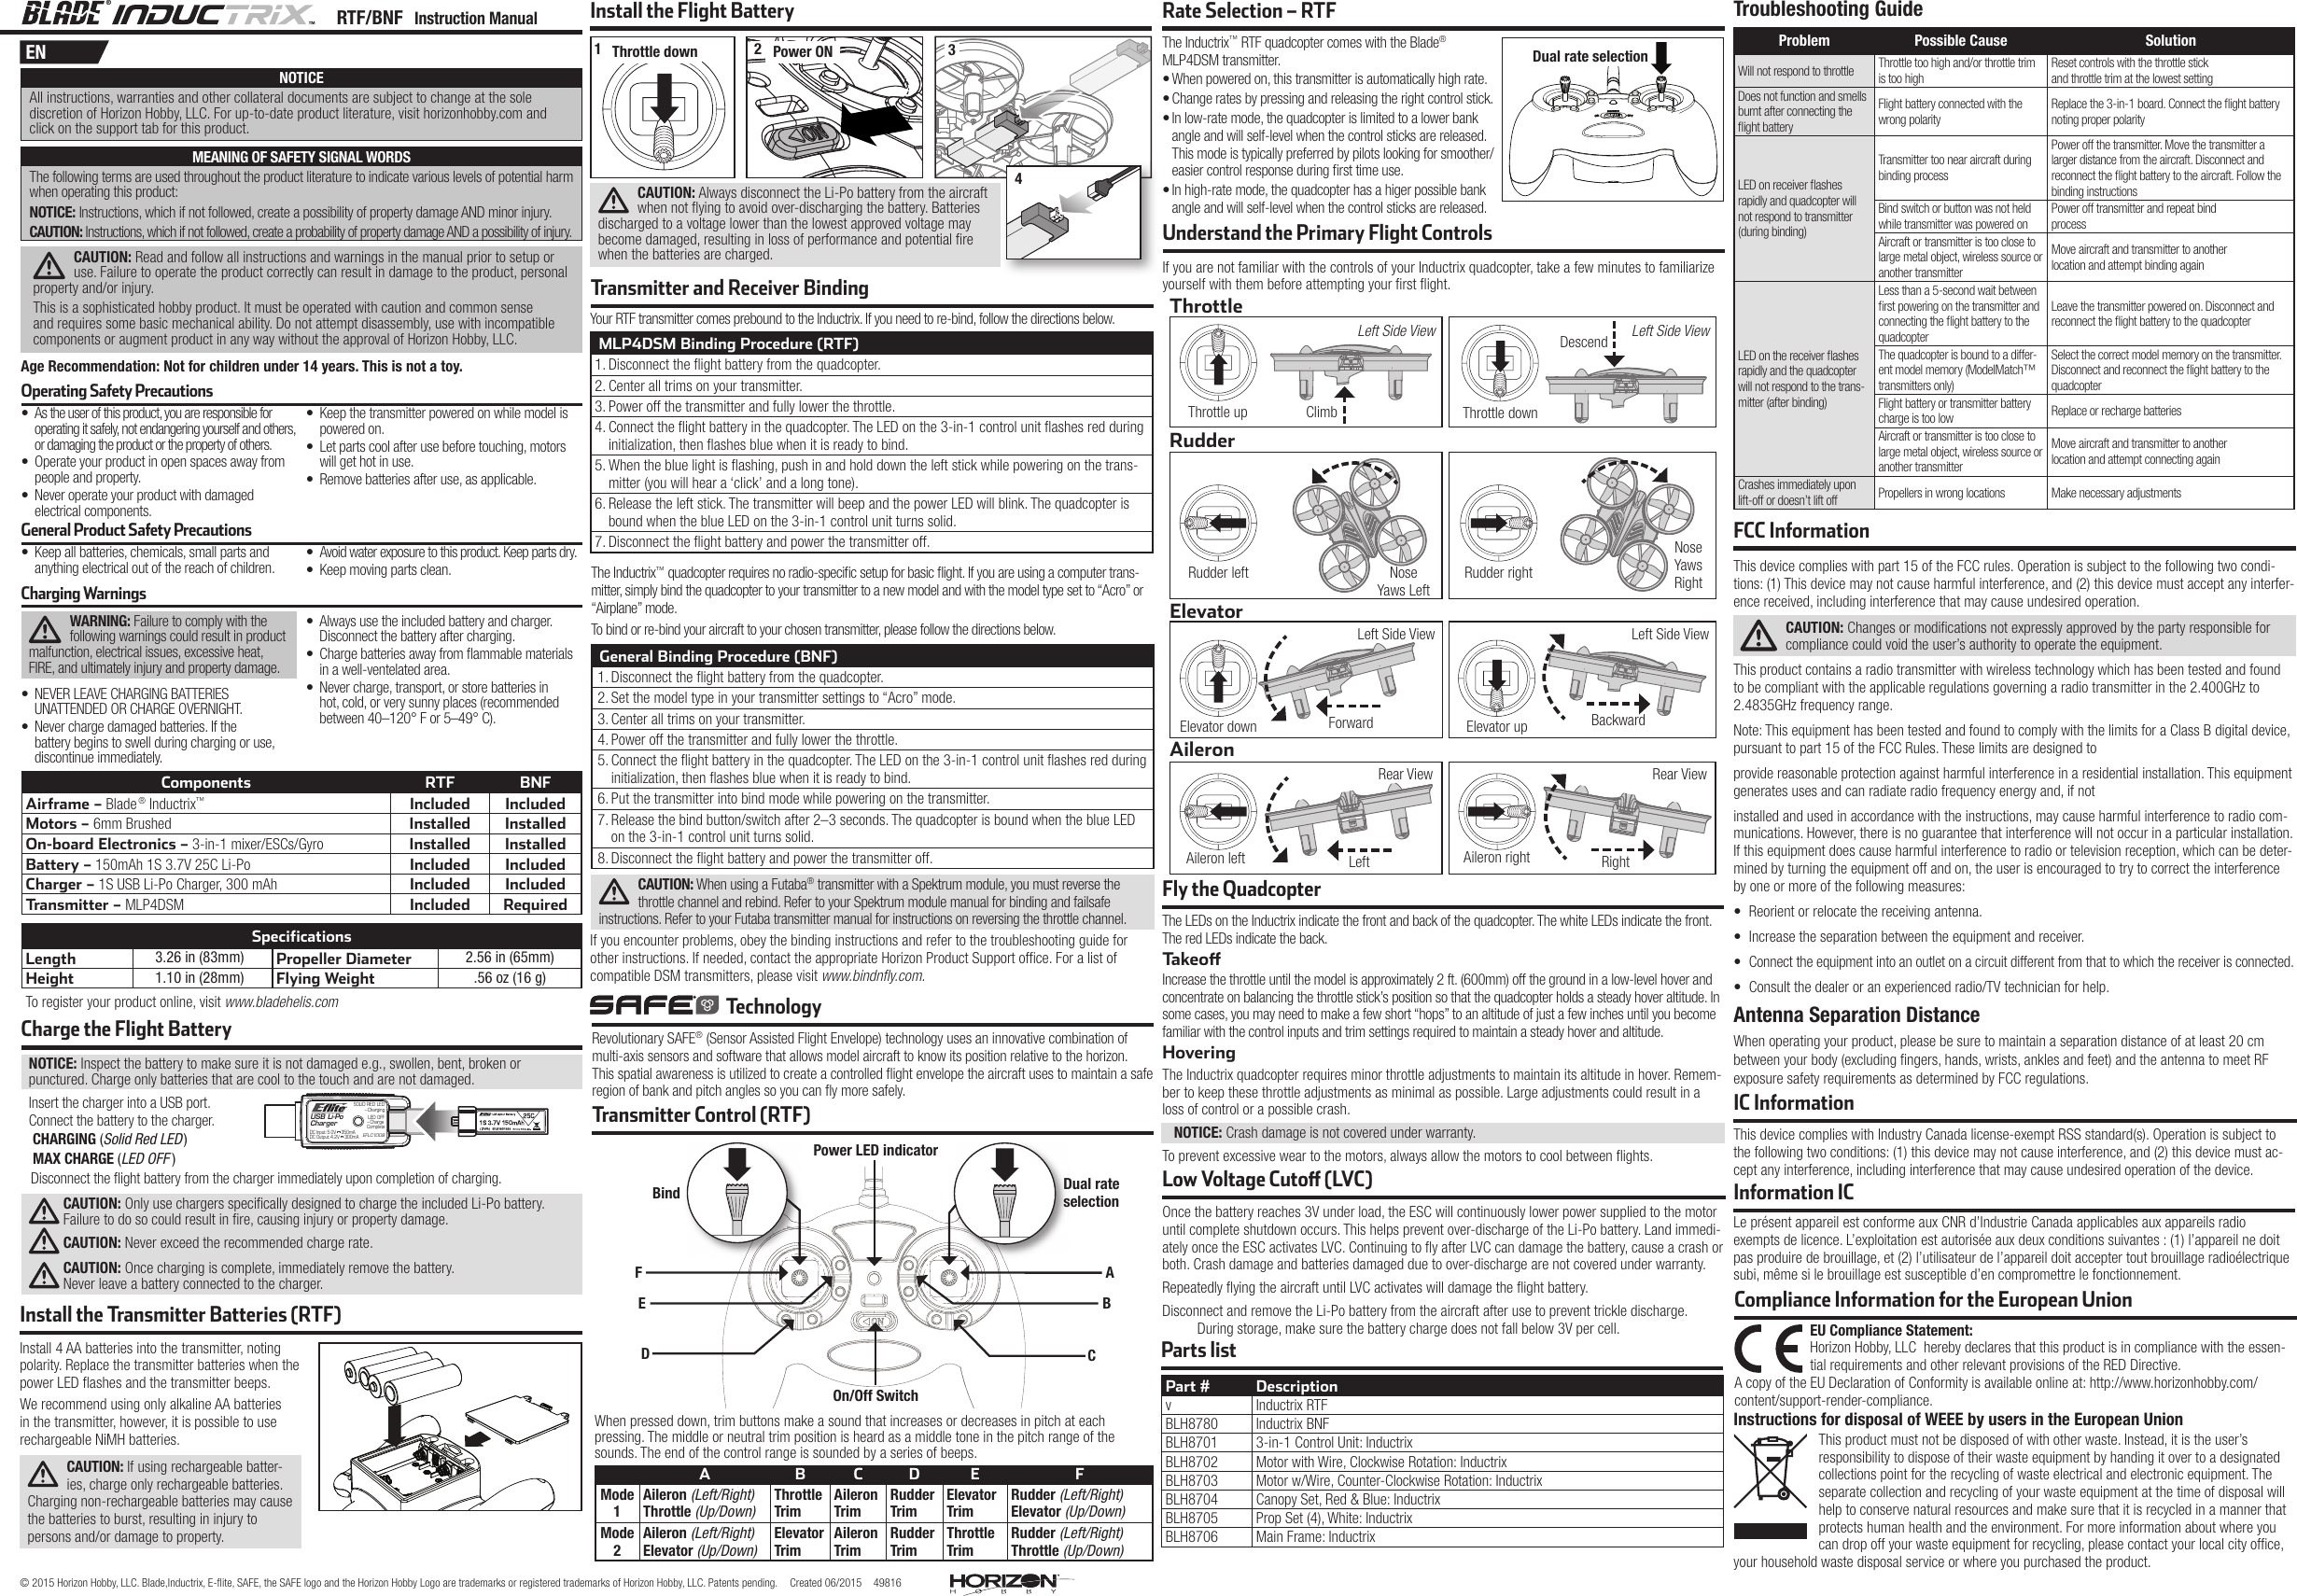 Page 1 of Horizon Hobby BLH8701 Inductrix User Manual 49816 1 BLH Inductrix Manual FINAL indd